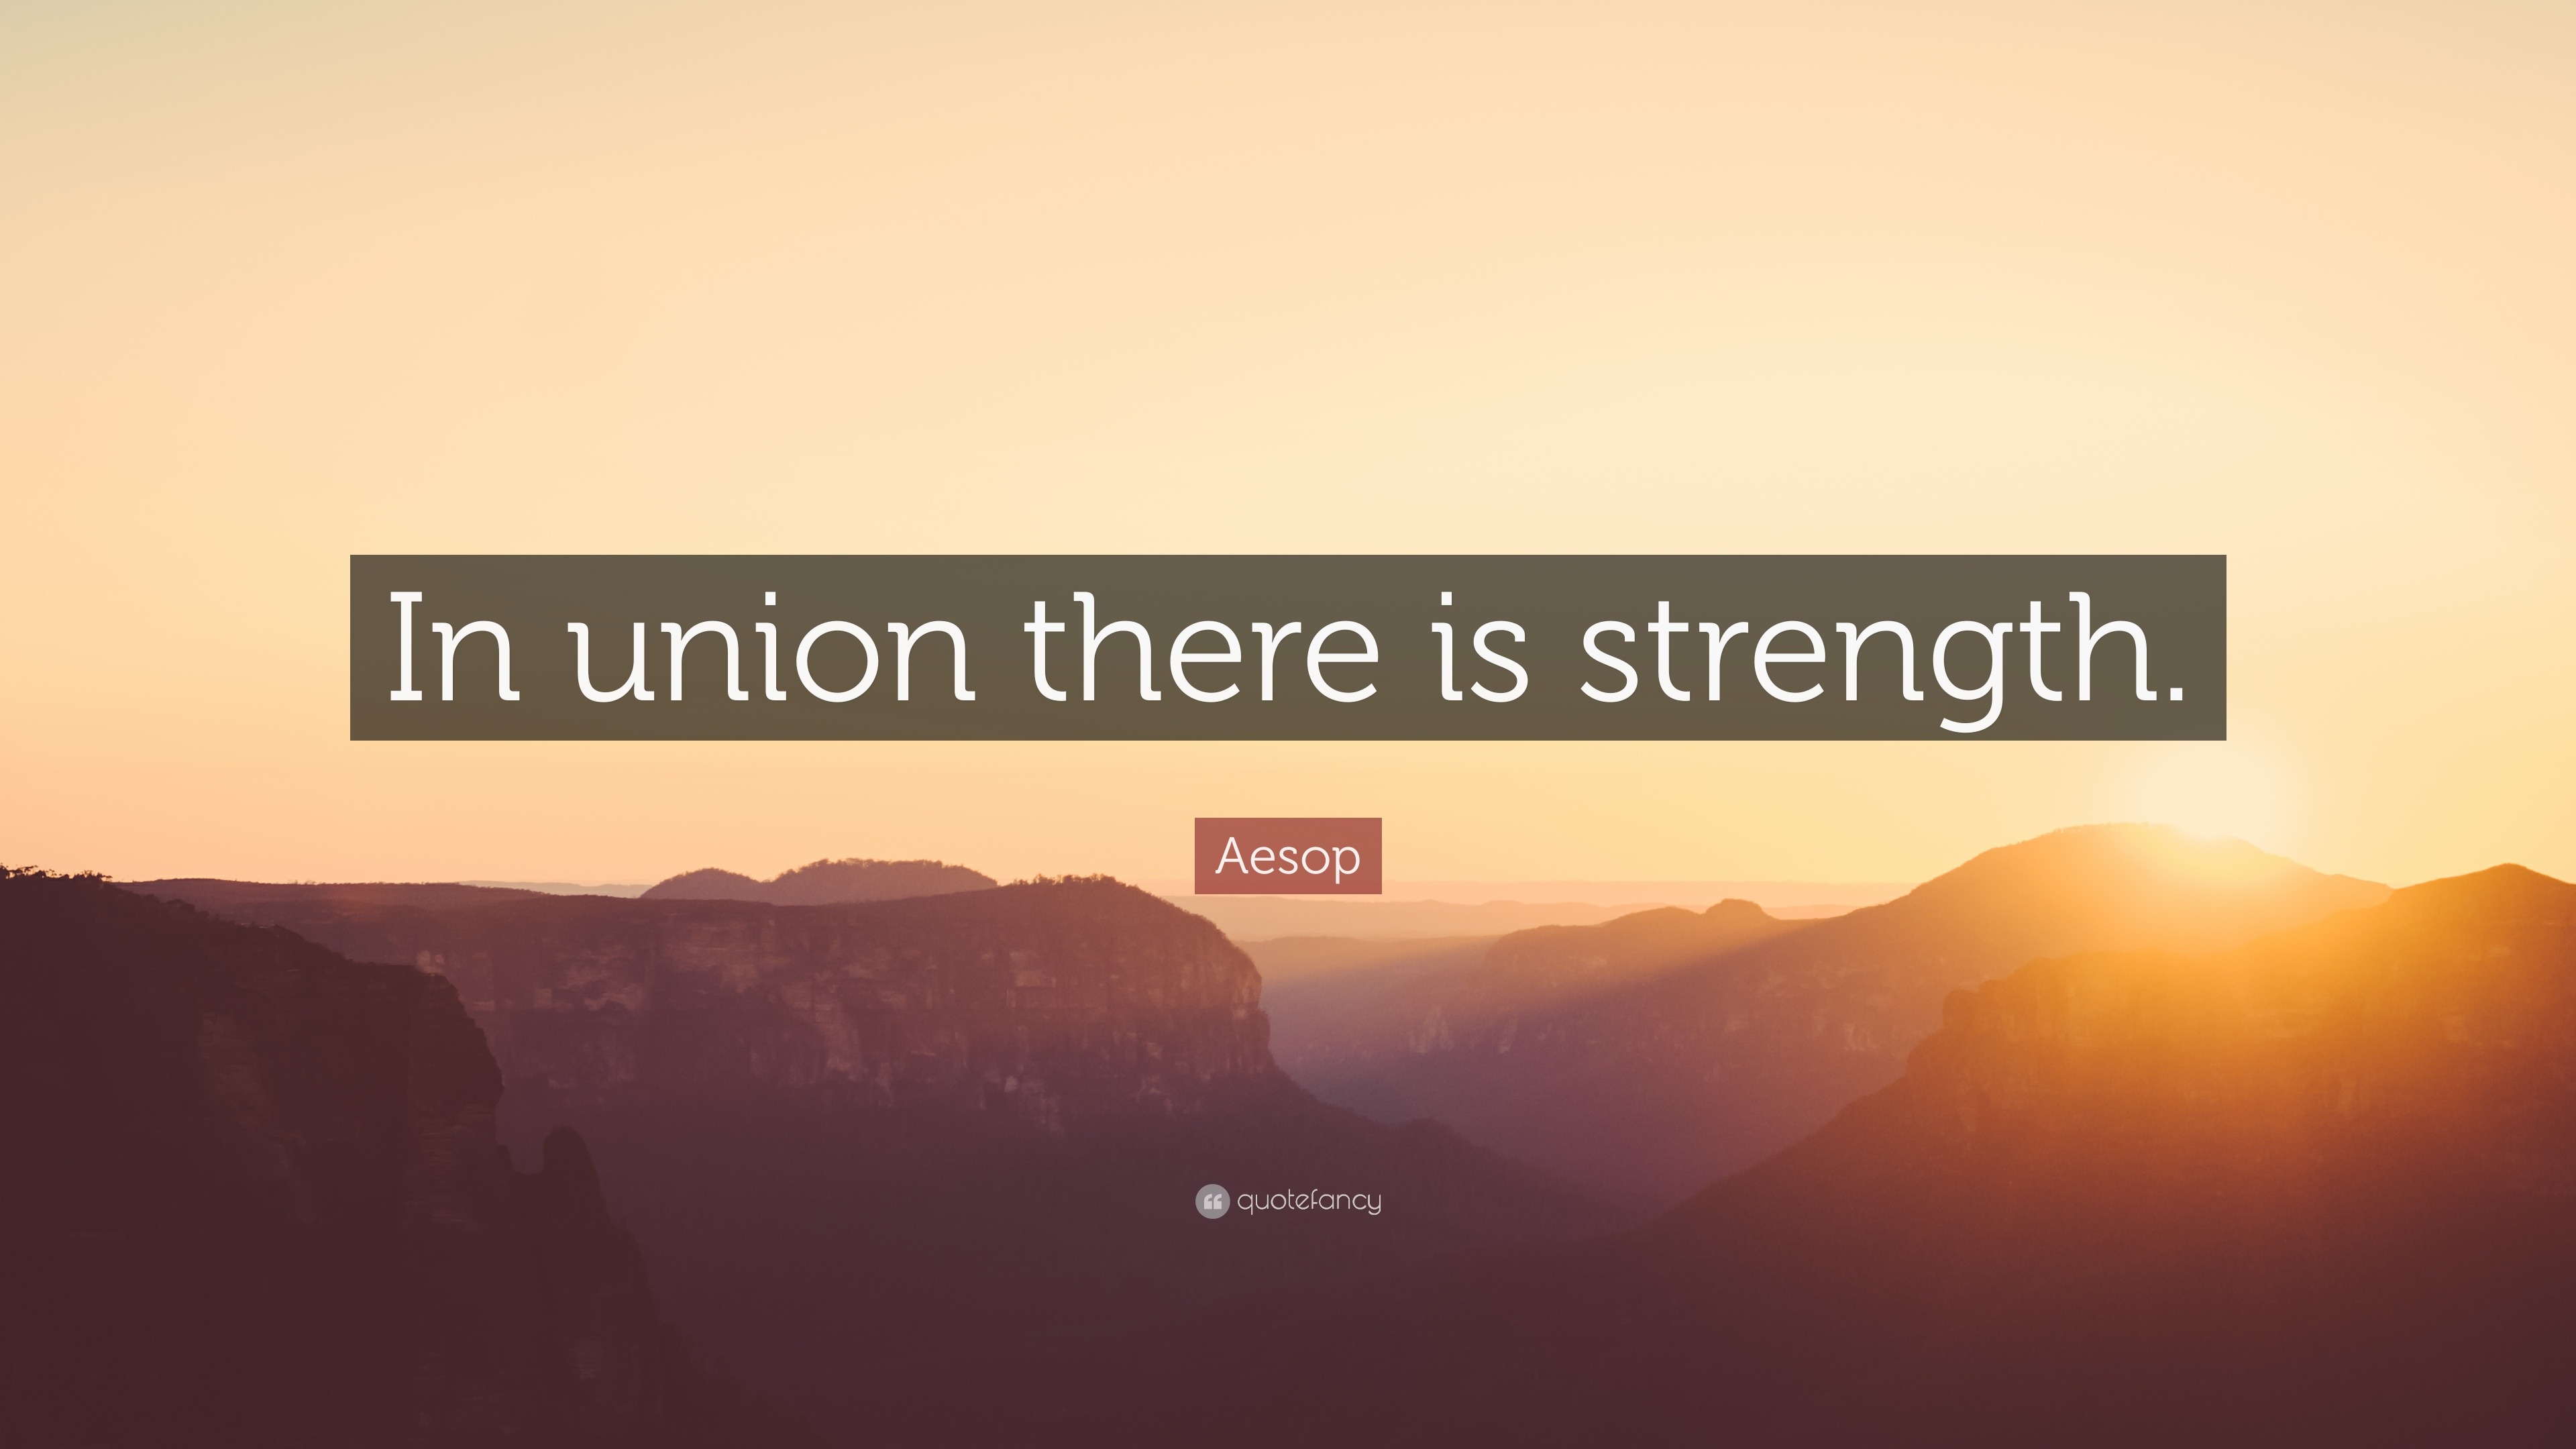 aesop quote: "in union there is strength.